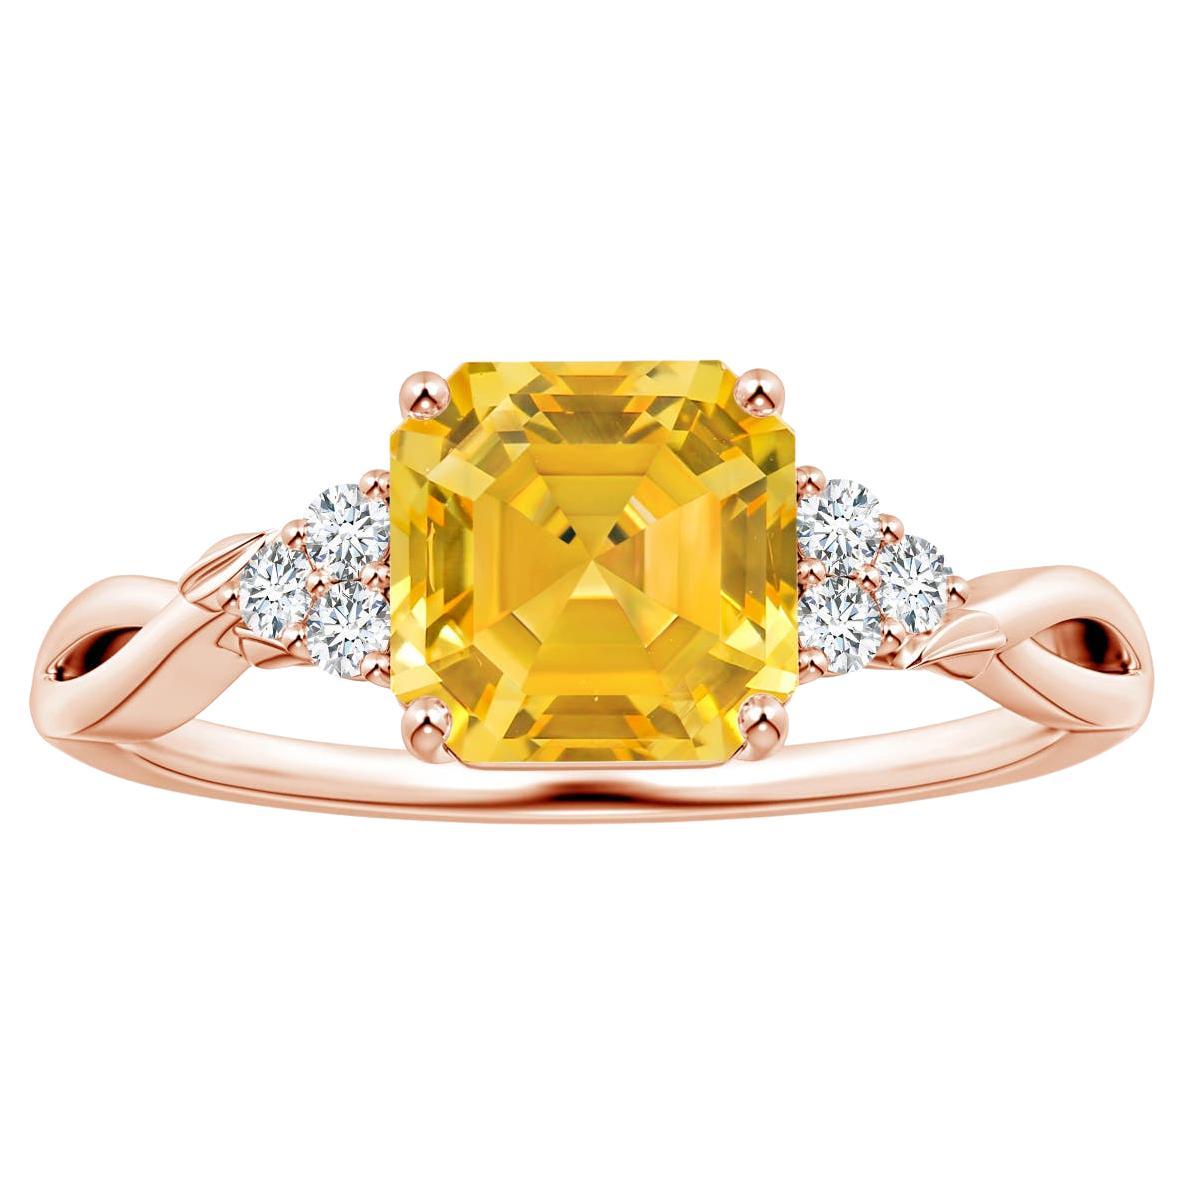 For Sale:  ANGARA GIA Certified Emerald-Cut Yellow Sapphire & Diamond Ring in Rose Gold